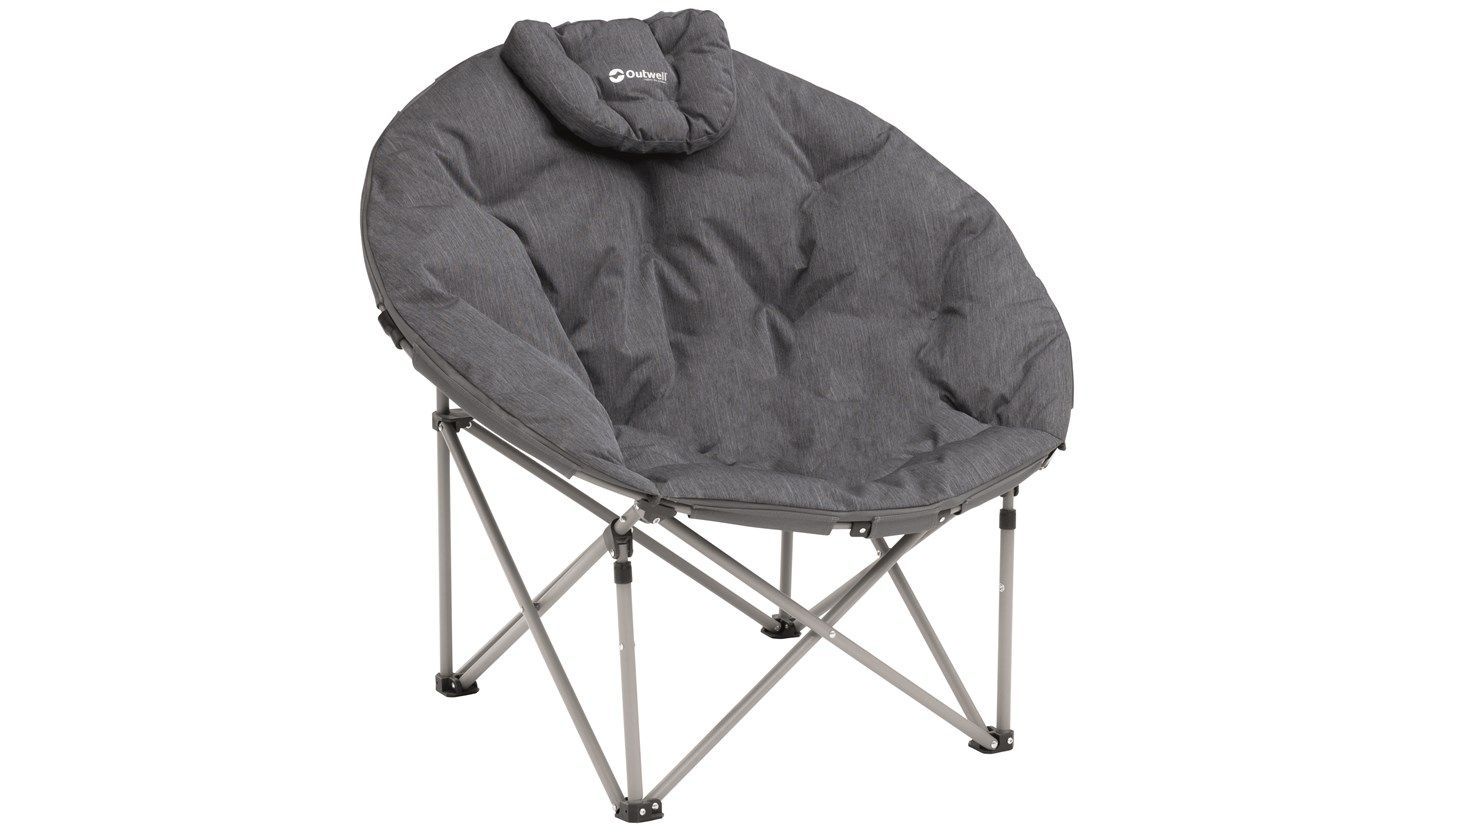 Outwell Kentucky Lake Folding Moon Camping Chair-Camping Chairs-Outwell-5709388089137-470309- DC Leisure